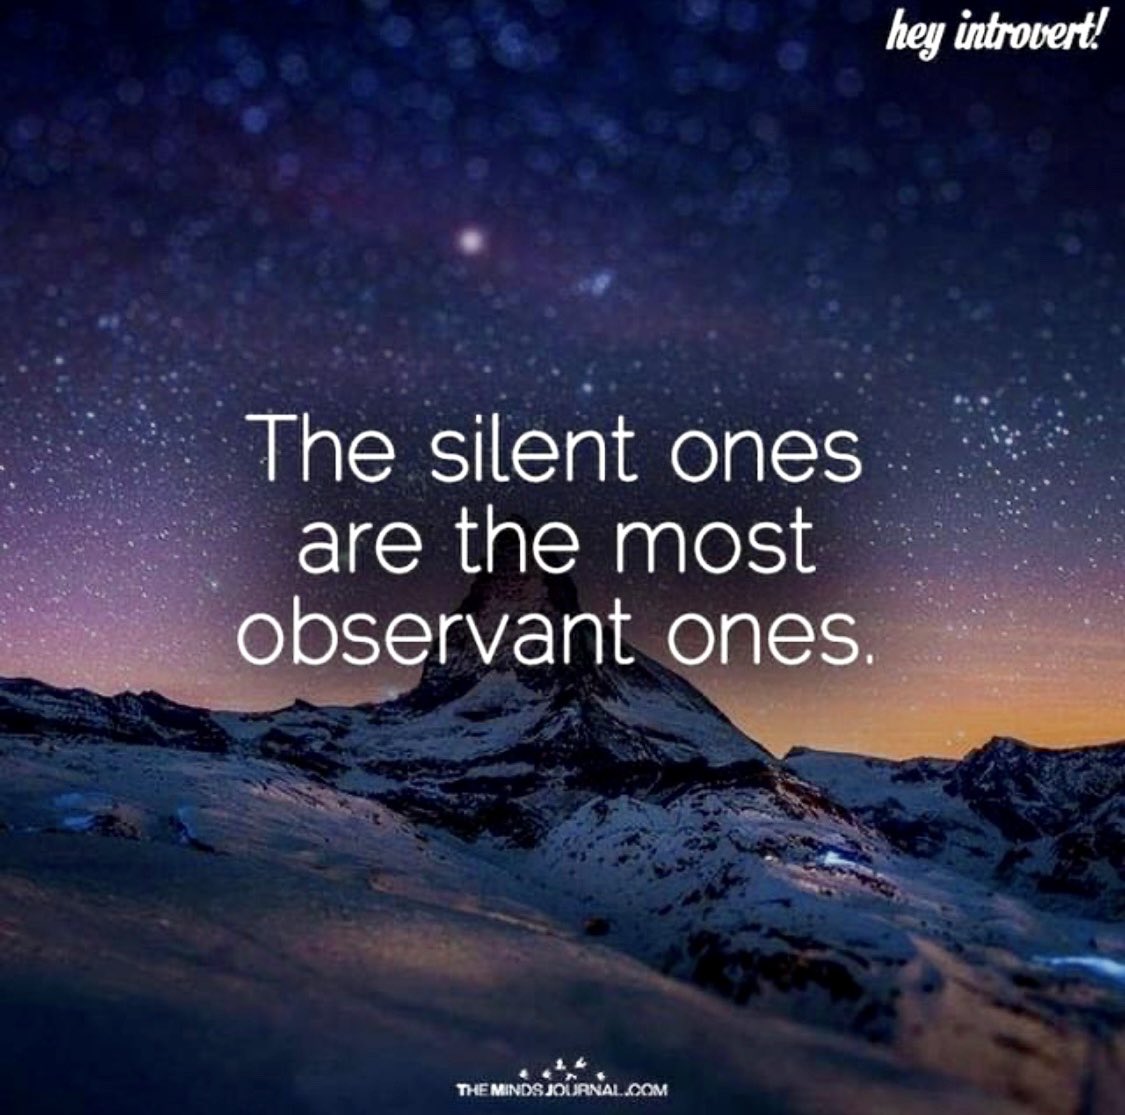 The silent ones are the most observant ones. @themindsjournal #MindsJournal #Observant #Observation #Quiet #Silent #Introvert #IntrovertProblems #IntrovertLife #IntrovertStruggles #IntrovertQuotes #Introverting